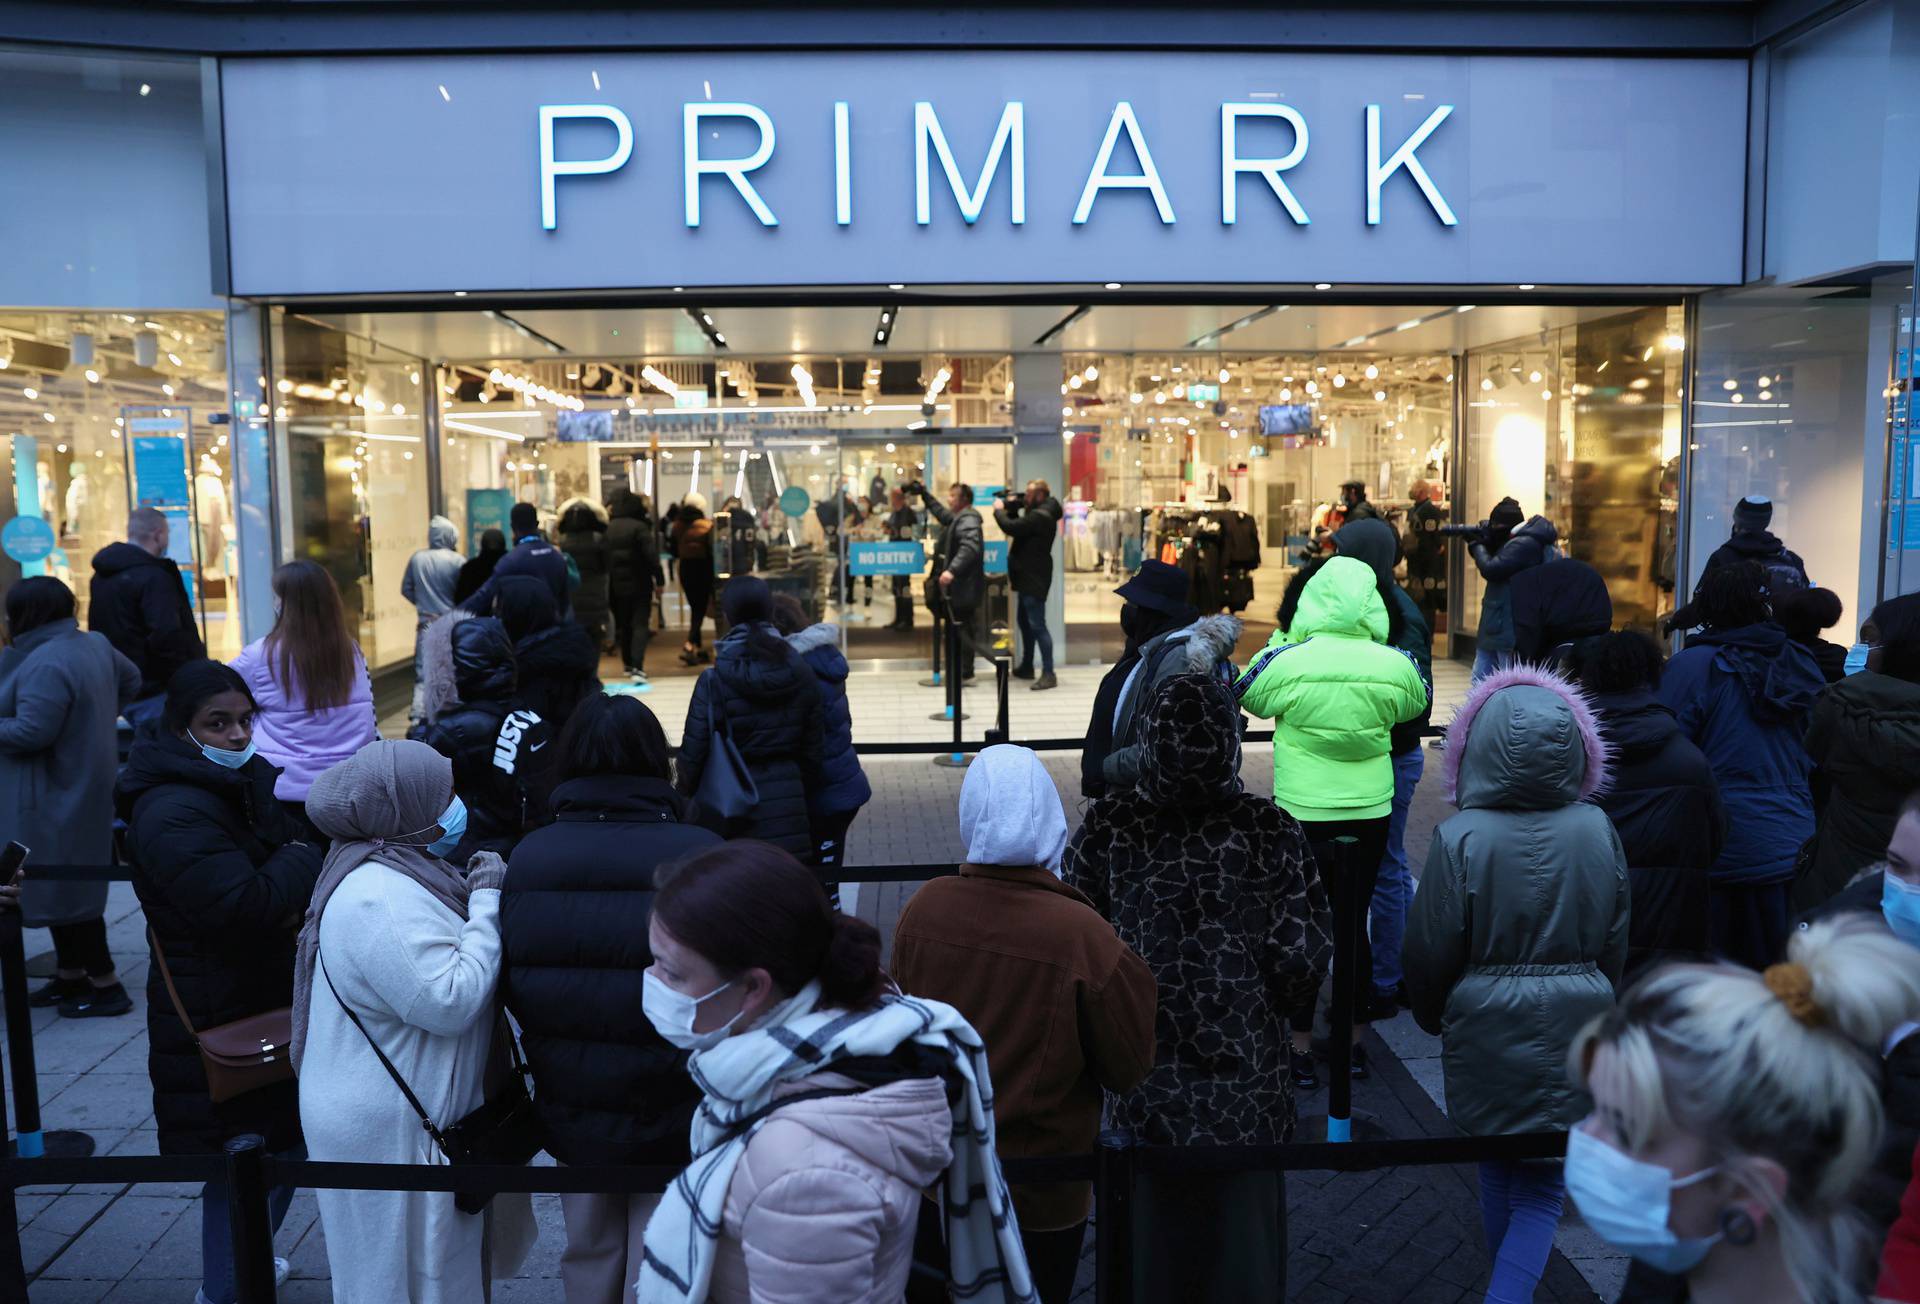 FILE PHOTO: The retail store Primark in Birmingham, Britain reopens its doors after a third lockdown imposed in early January due to the ongoing coronavirus disease (COVID-19) pandemic